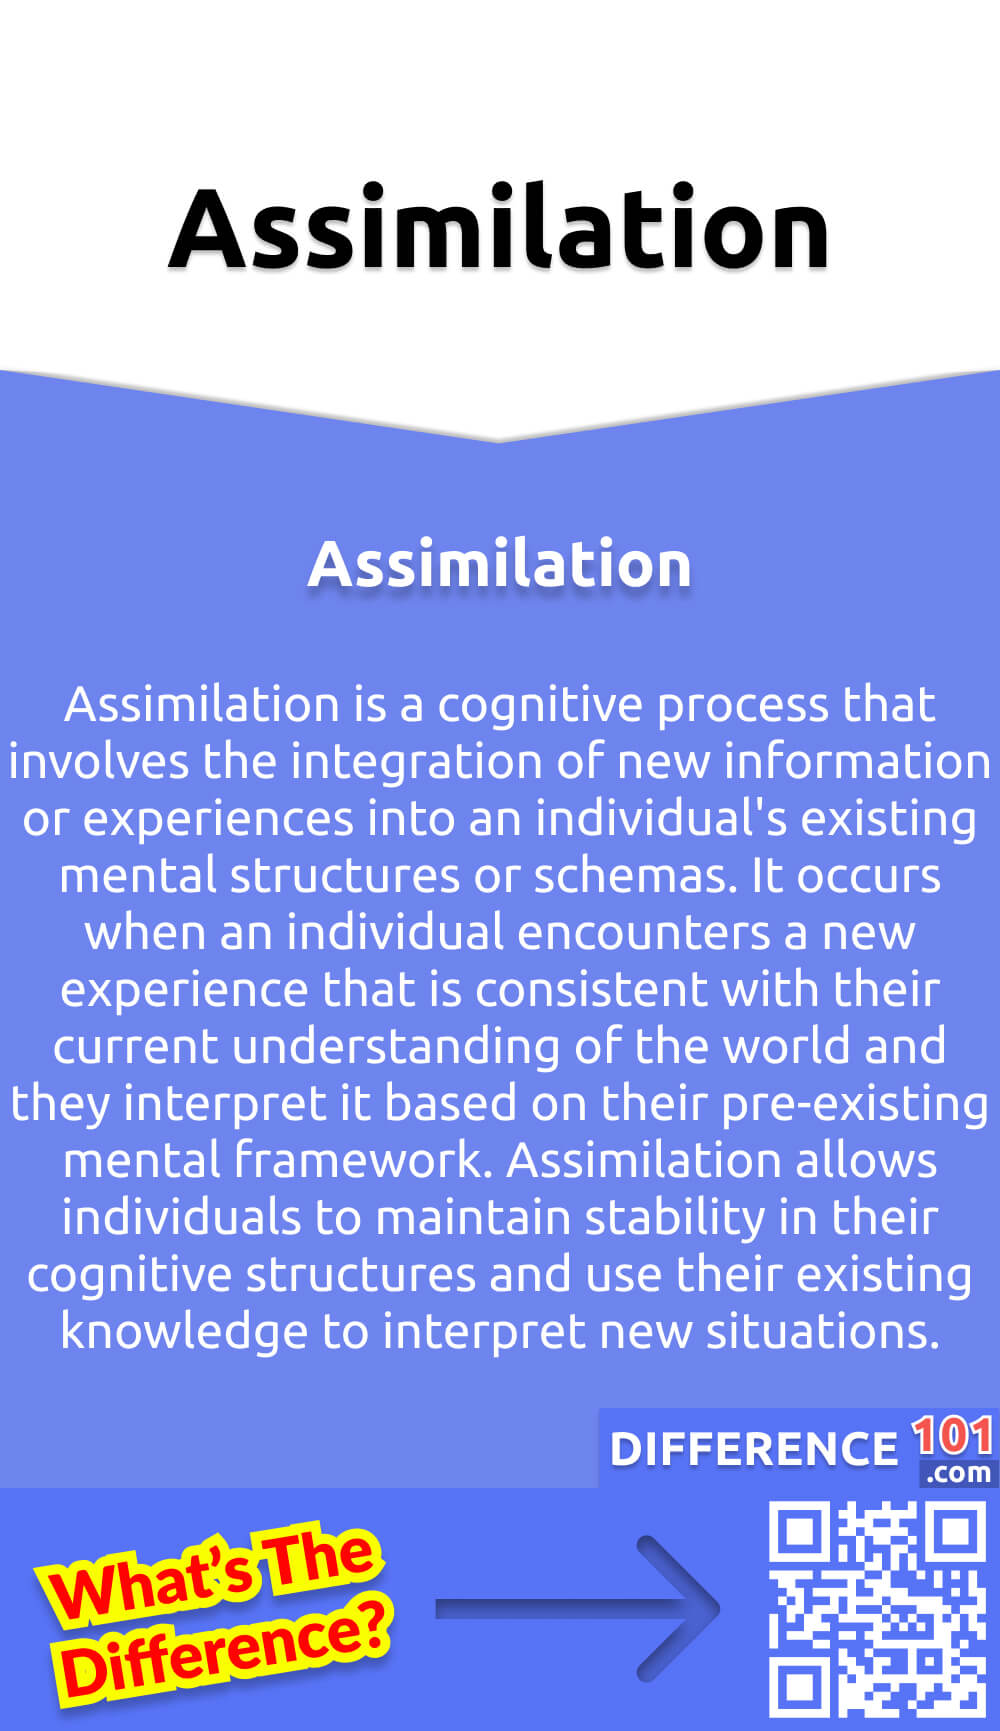 What Is Assimilation? Assimilation is a cognitive process that involves the integration of new information or experiences into an individual's existing mental structures or schemas. It occurs when an individual encounters a new experience that is consistent with their current understanding of the world and they interpret it based on their pre-existing mental framework. Schemas are cognitive frameworks that help us categorize and make sense of new information. Assimilation allows individuals to maintain stability in their cognitive structures and use their existing knowledge to interpret new situations. This process is essential for learning and adapting to new environments and experiences, as it allows individuals to build on their existing knowledge and expand their understanding of the world.